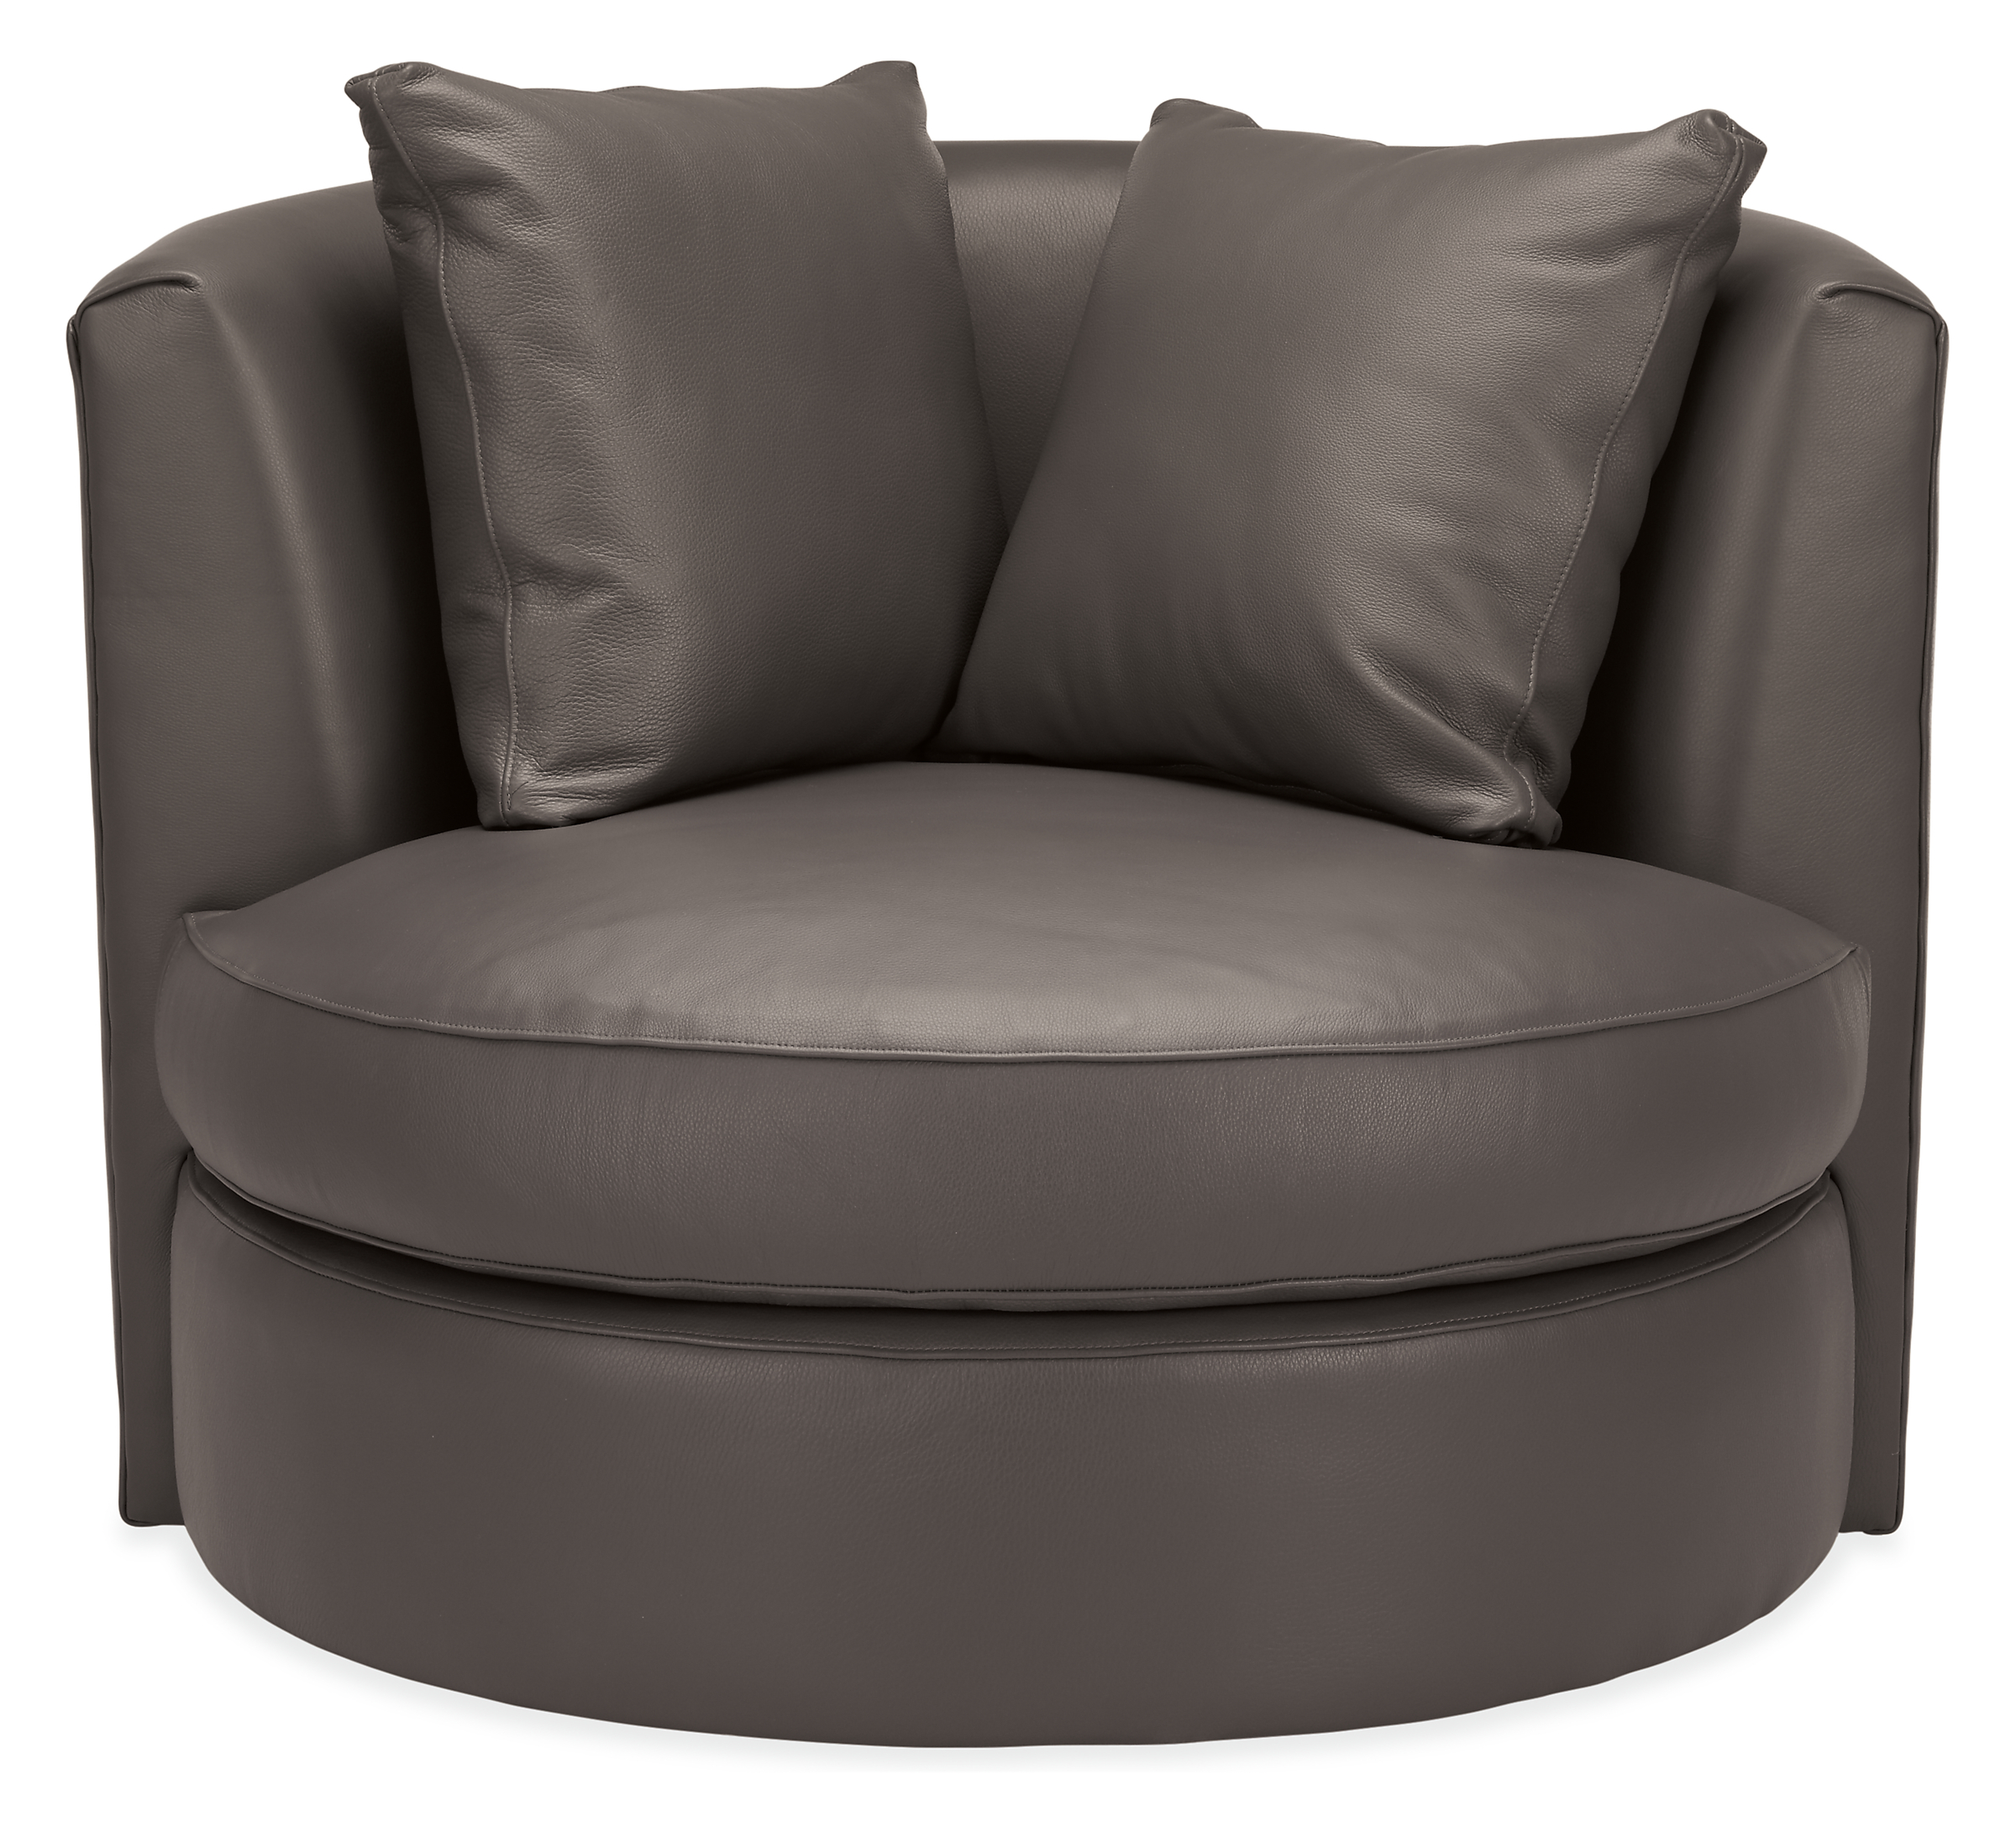 Front view of Eos 42" Swivel Chair in Urbino Smoke.